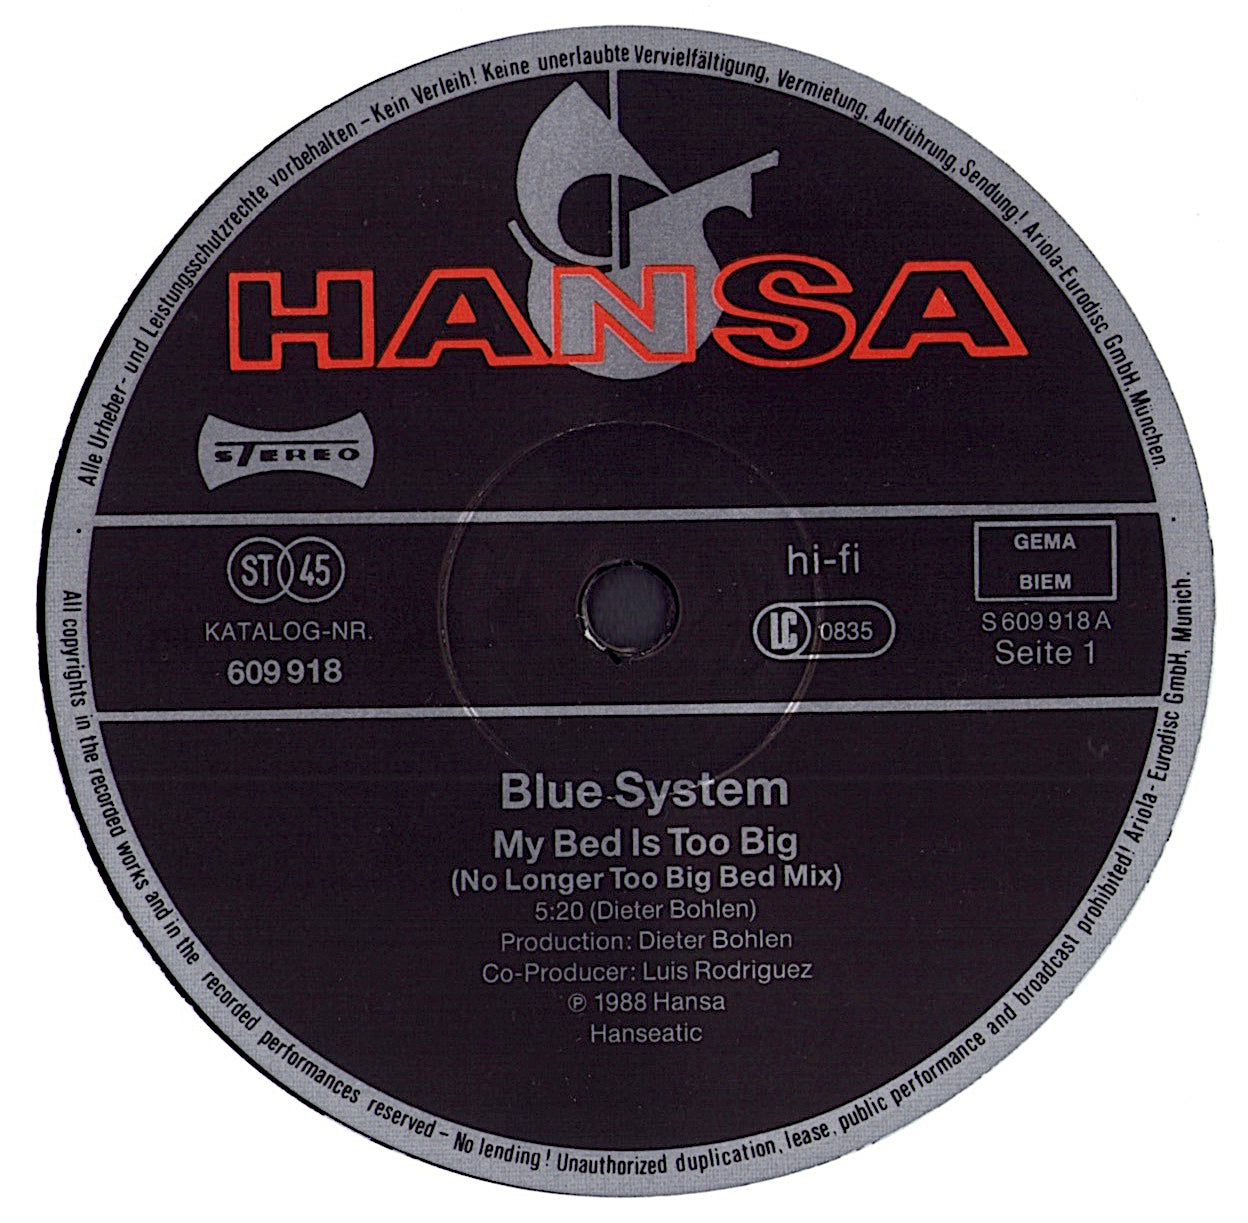 Blue System - My Bed Is Too Big Vinyl 12"